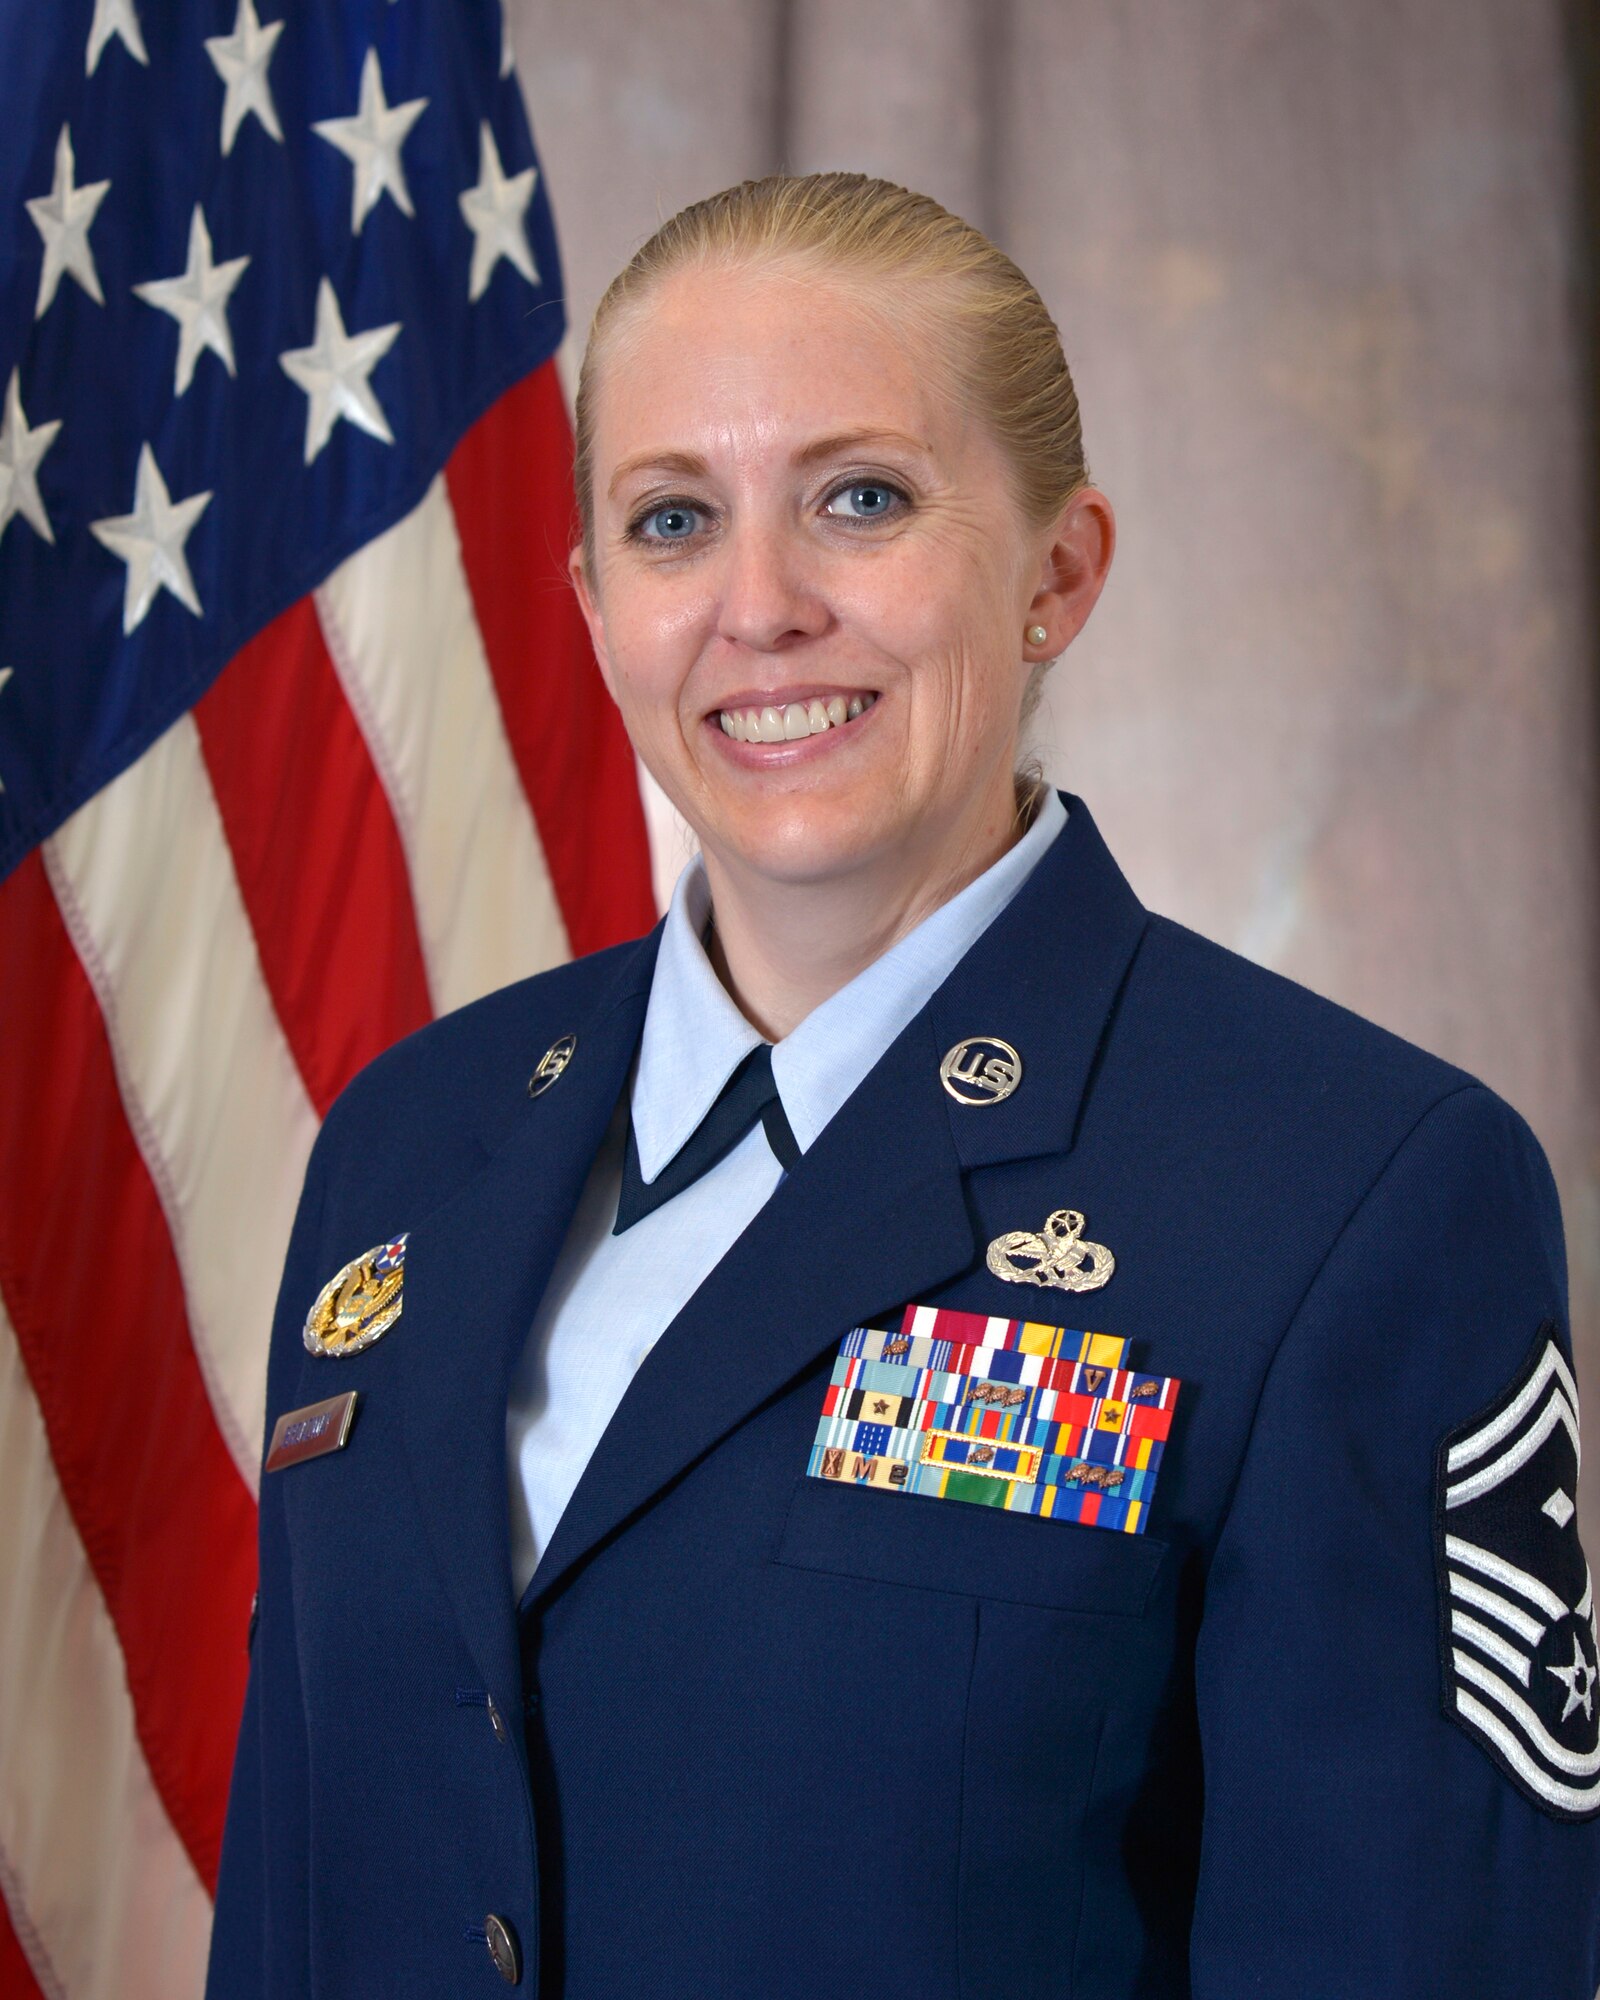 Senior Master Sgt. Marcy K. Broadway is the First Sergeant of The I.G. Brown Training and Education Center, McGhee Tyson Air National Guard Base, Tenn. As First Sergeant, she reports directly to the Commander to ensure a mission ready force and is responsible for the health, morale, welfare and conduct of all enlisted members assigned. (U.S. Air National Guard file photo/Released)